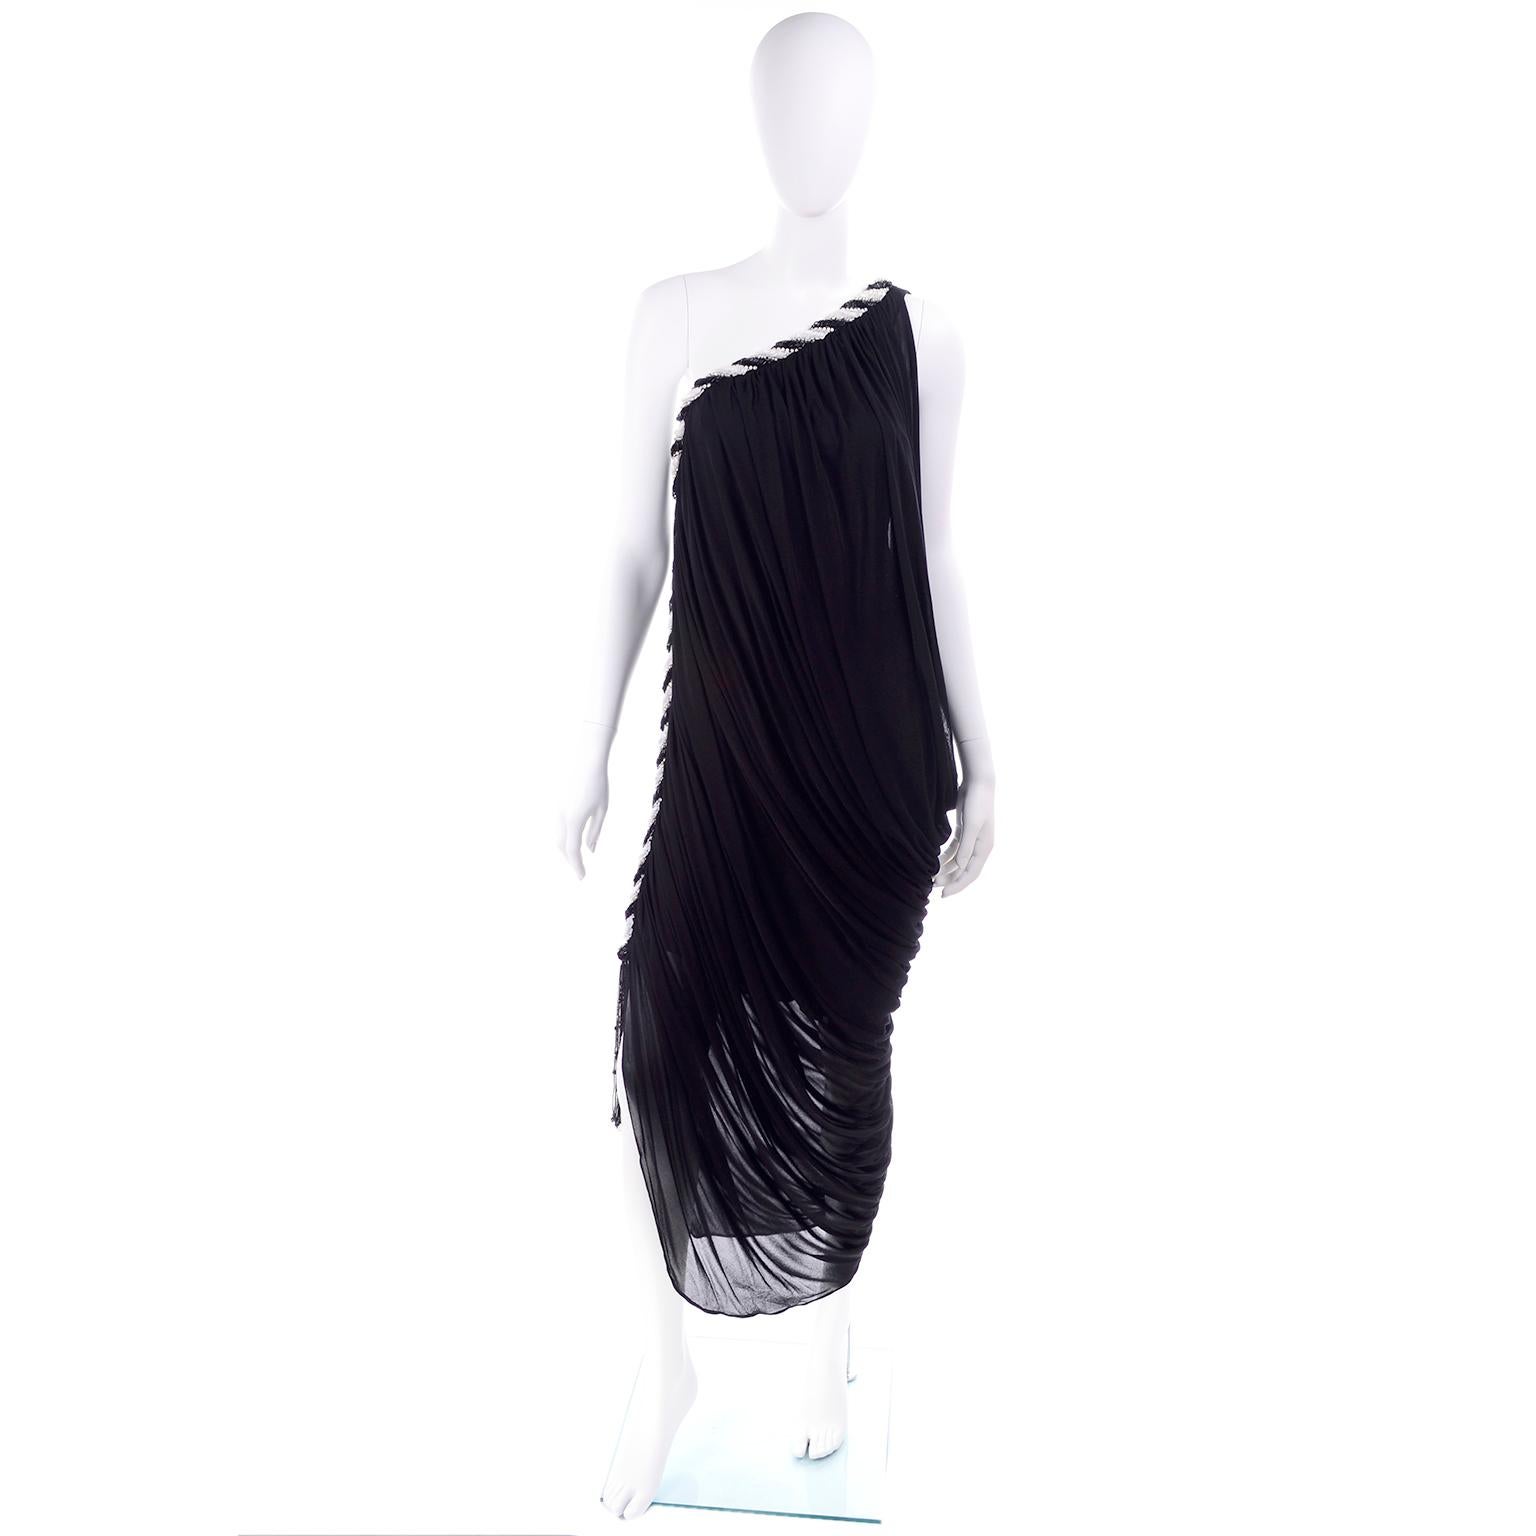 This absolutely fabulous 1970's vintage dress was designed by Bob Mackie and it is truly incredible. The black jersey fabric of the dress is beautifully draped and it is trimmed with rows of black and white beads, clear beads, and rhinestones that